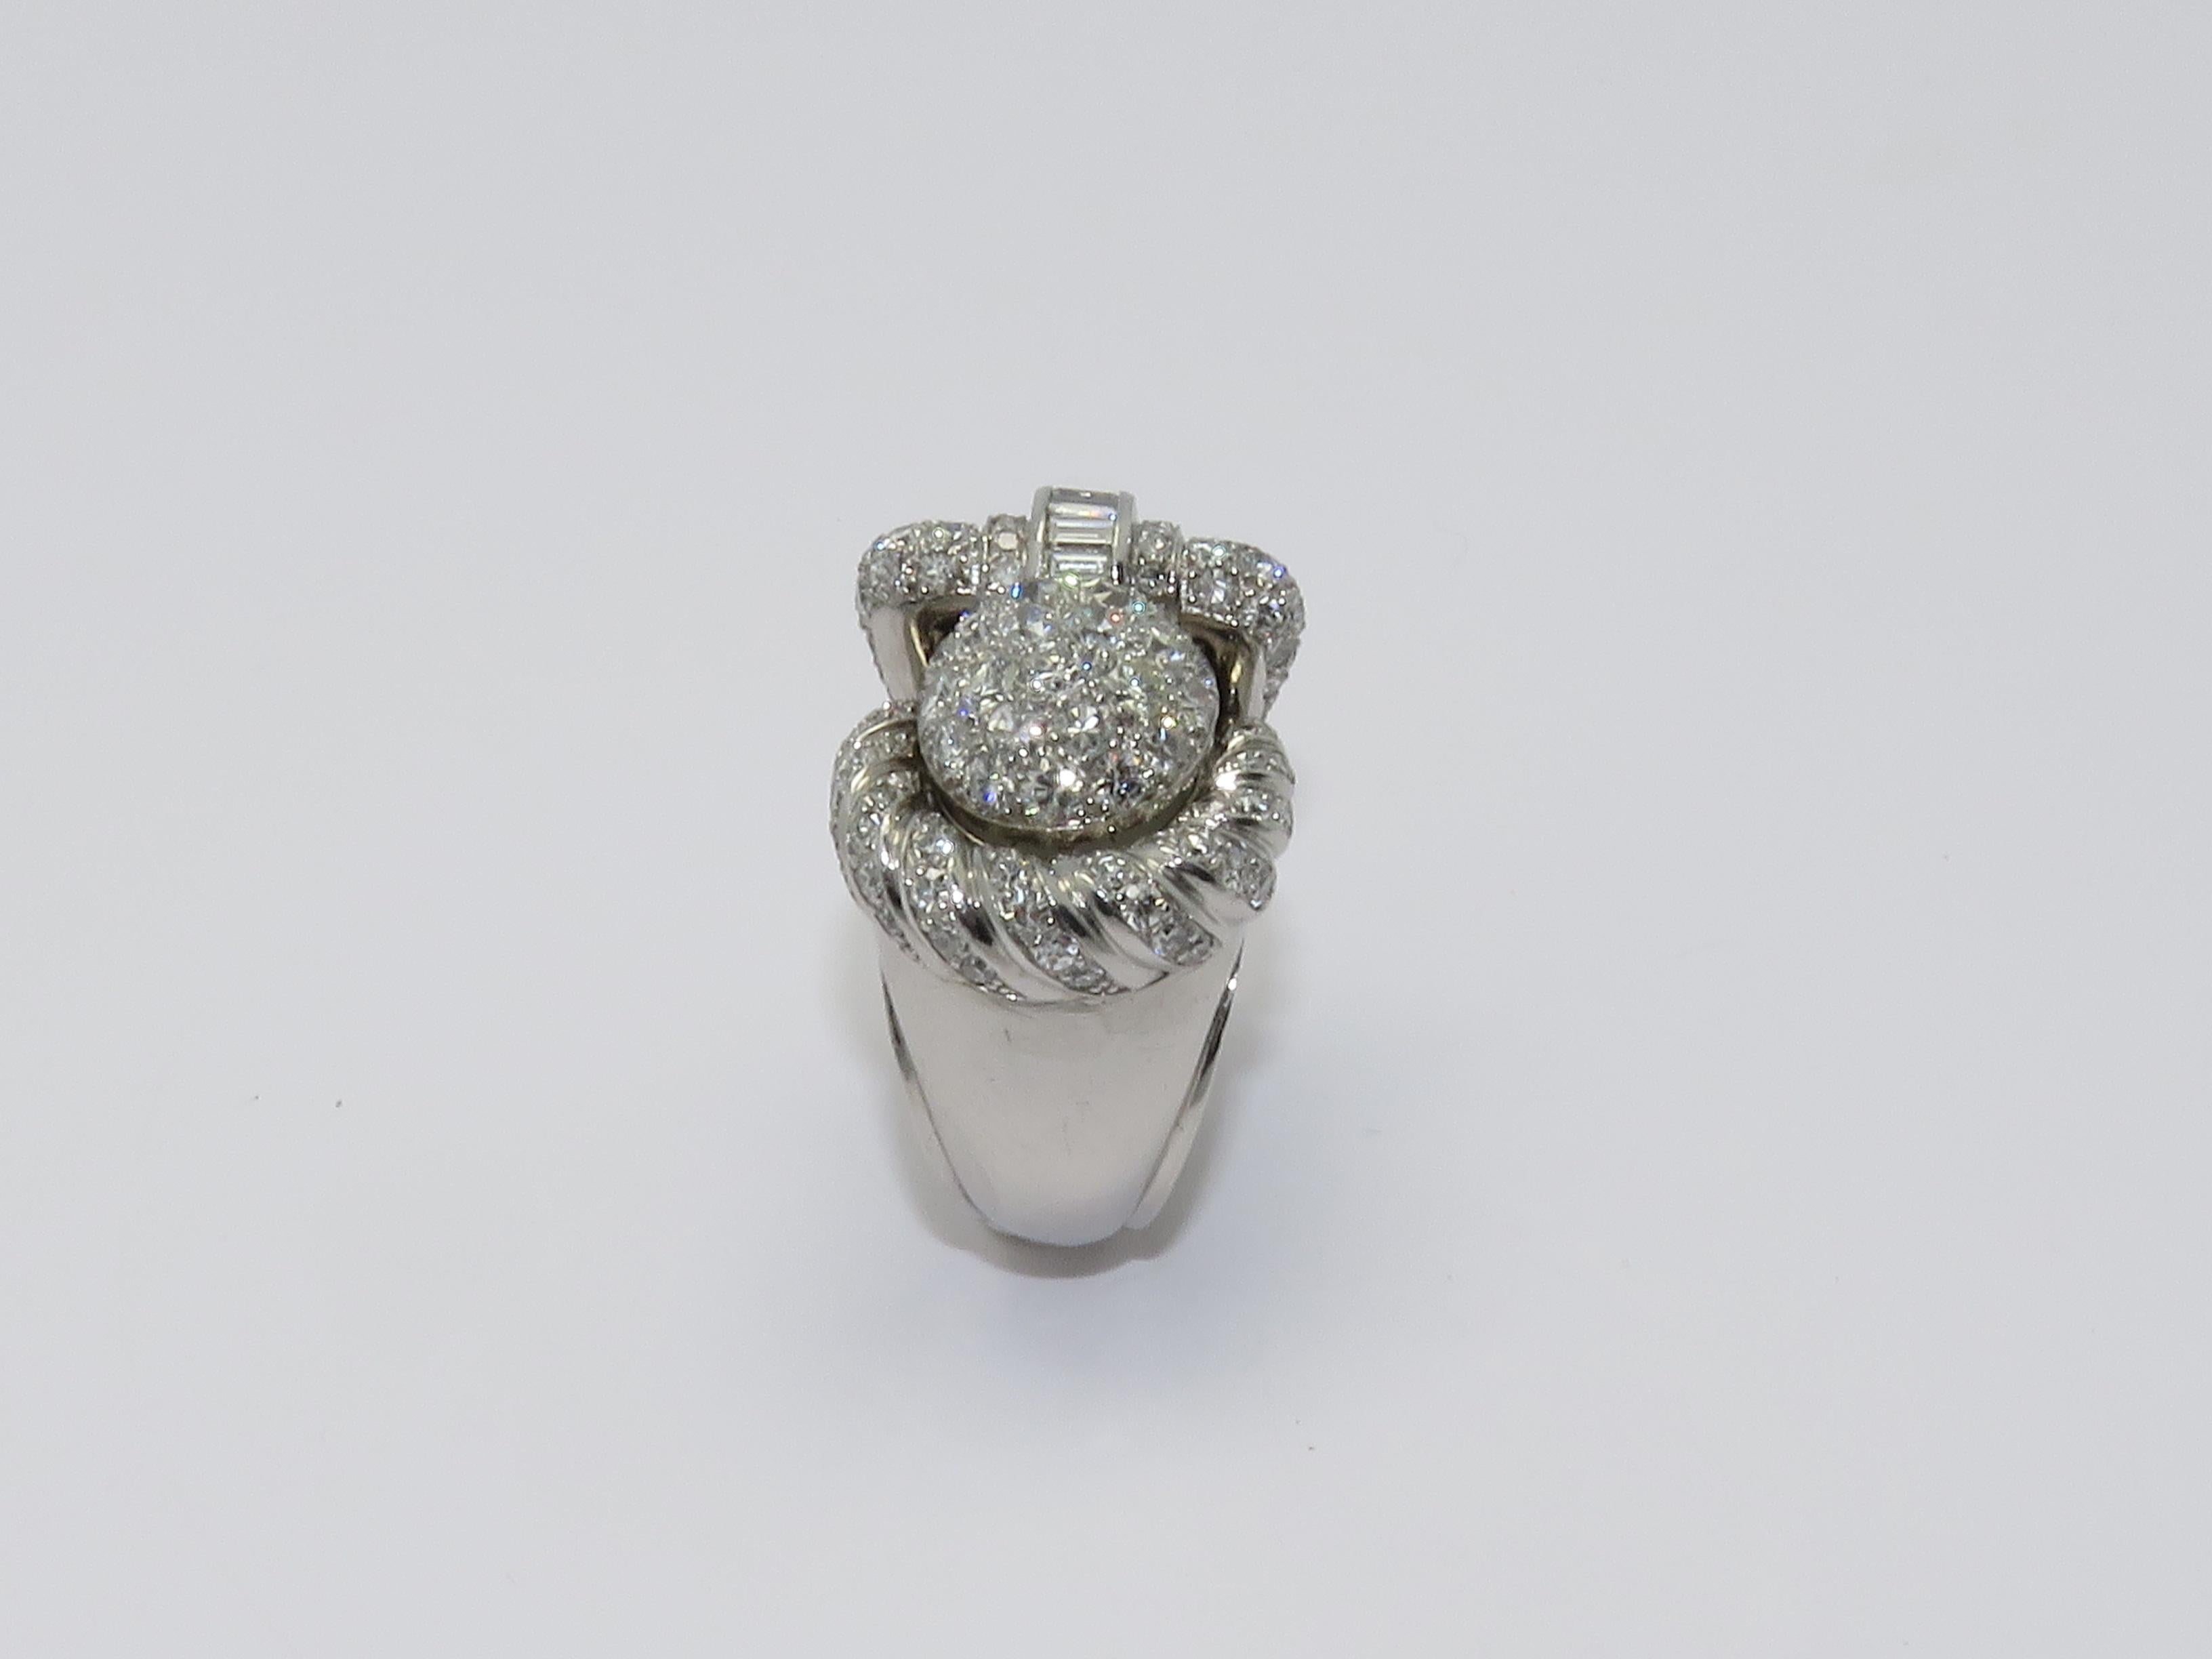 This Watch ring by Zenith is made in platinum and adorned by approximately 3 cts of fine white full cut diamonds.
Working Order
Circa 1950
Ring size: 6
Measurements:
Height: 1.18 in     Length: 1.02 in     Width: 0.75 in     Weight: 33.50 grams